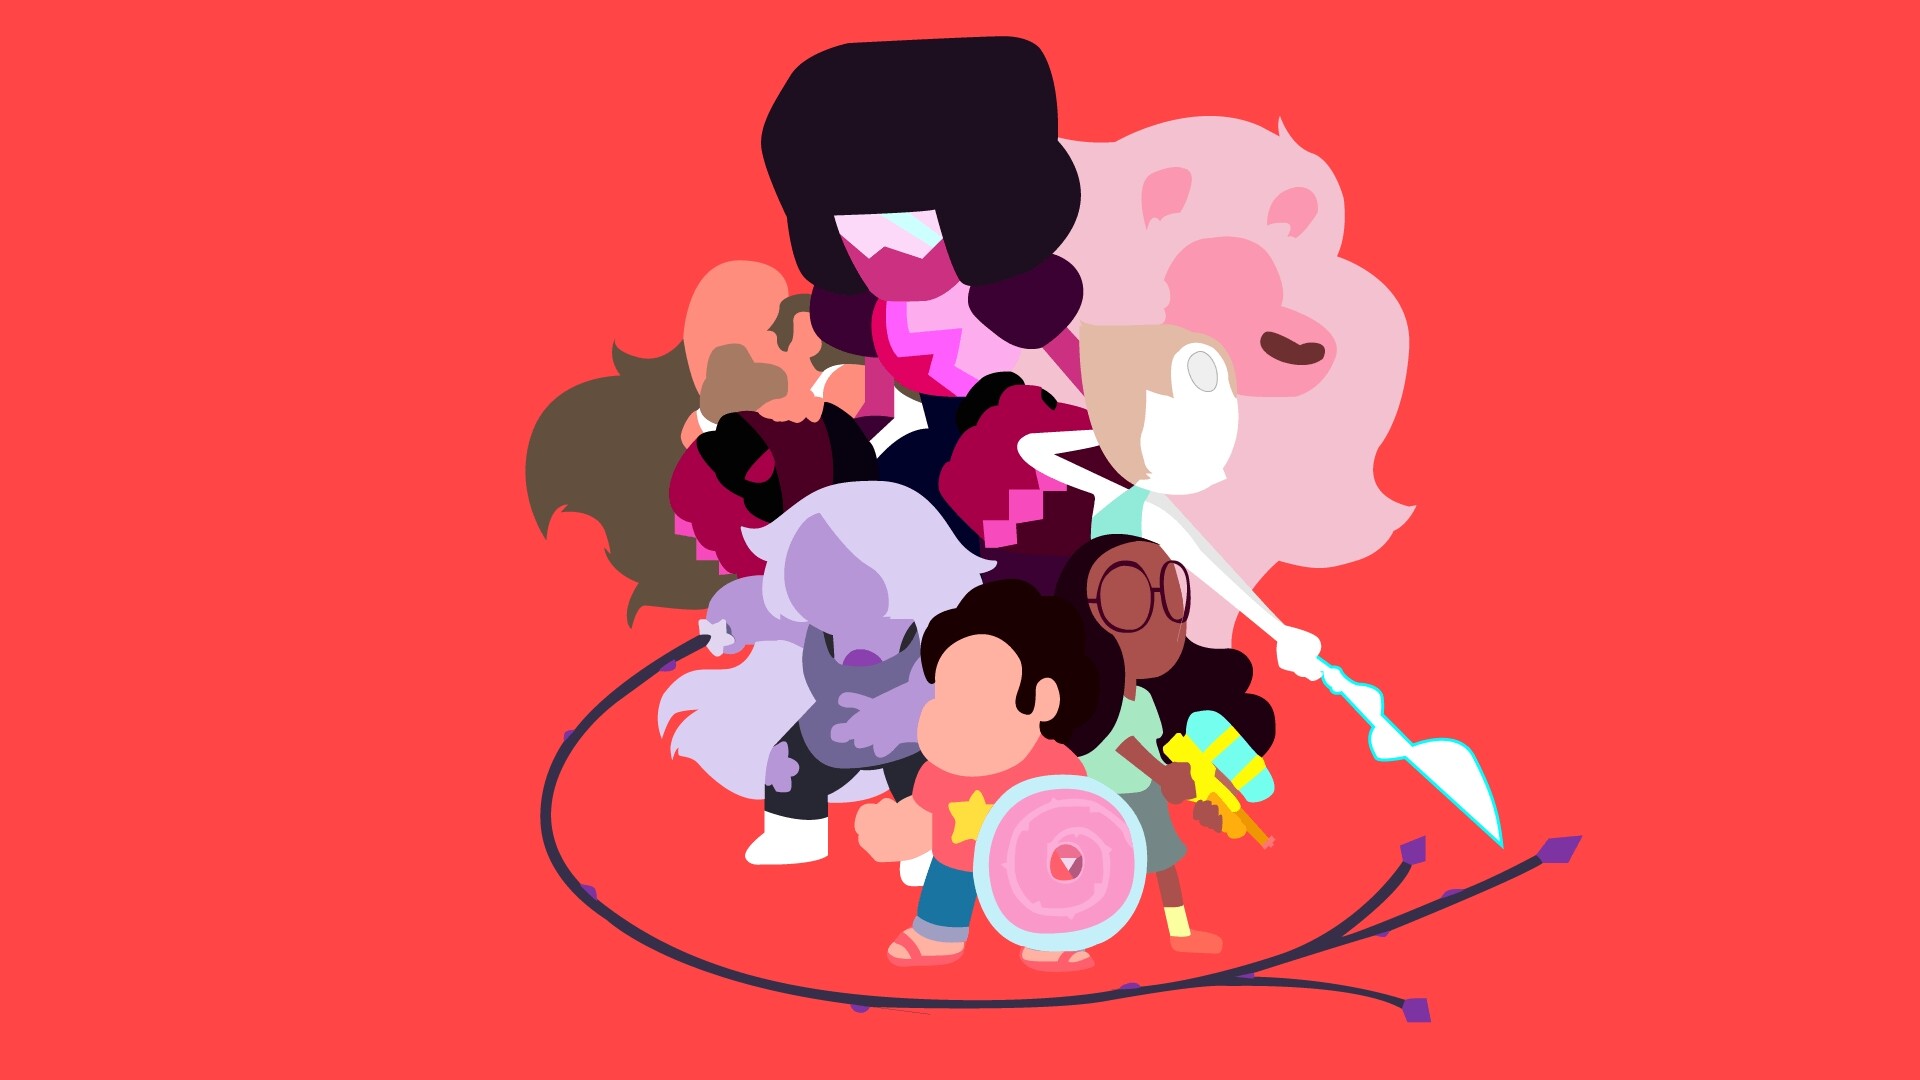 Garnet (Steven Universe): Abstract characters of an American animated TV series, Cartoon Network. 1920x1080 Full HD Wallpaper.